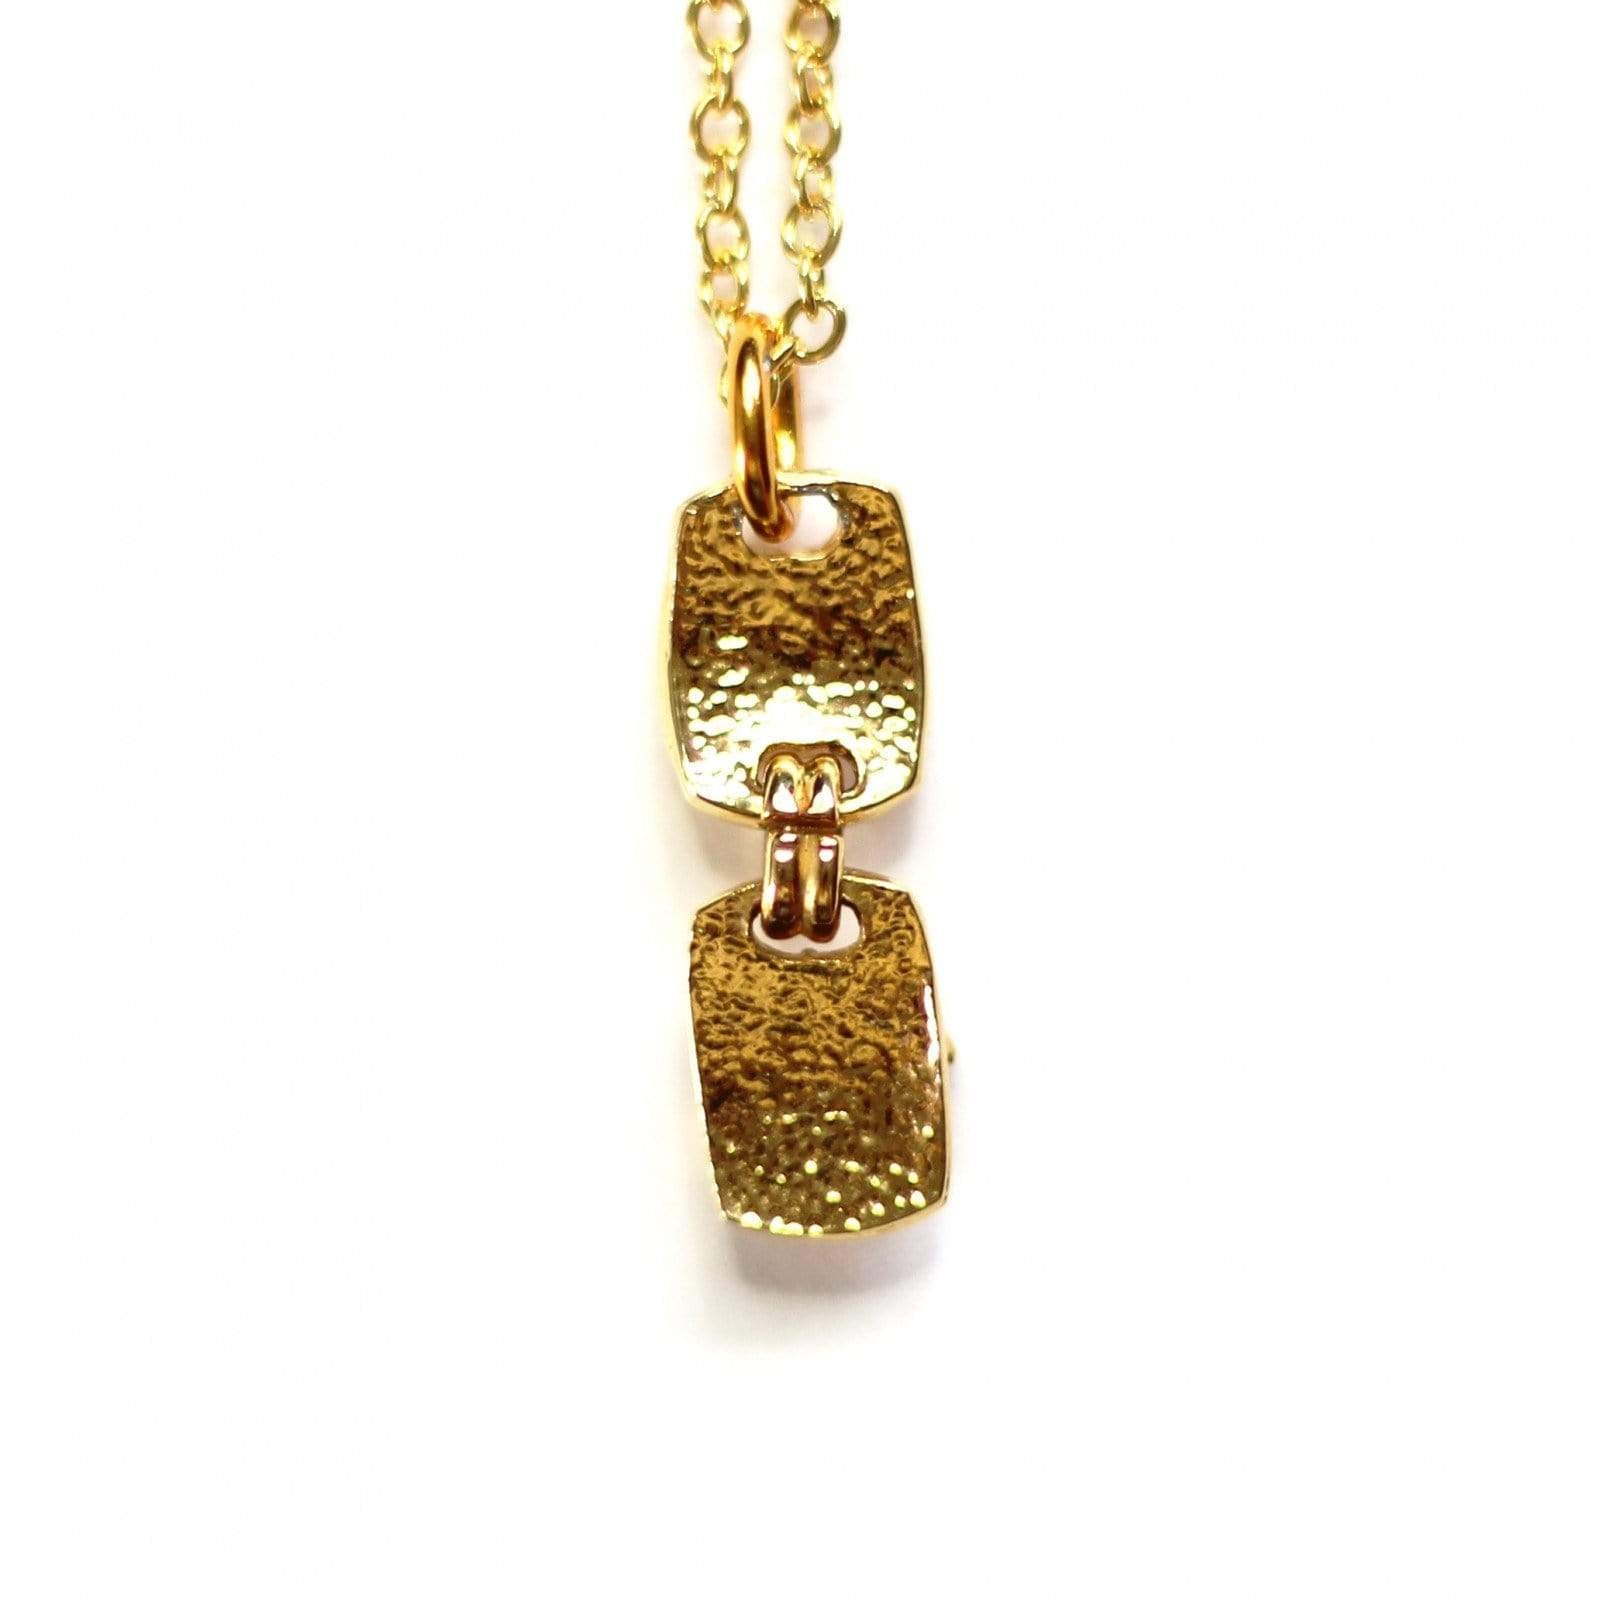 Gold Gianni Versace Greek Key Double Pendent Chain with Hanging Medusa Head RSTKD Vintage